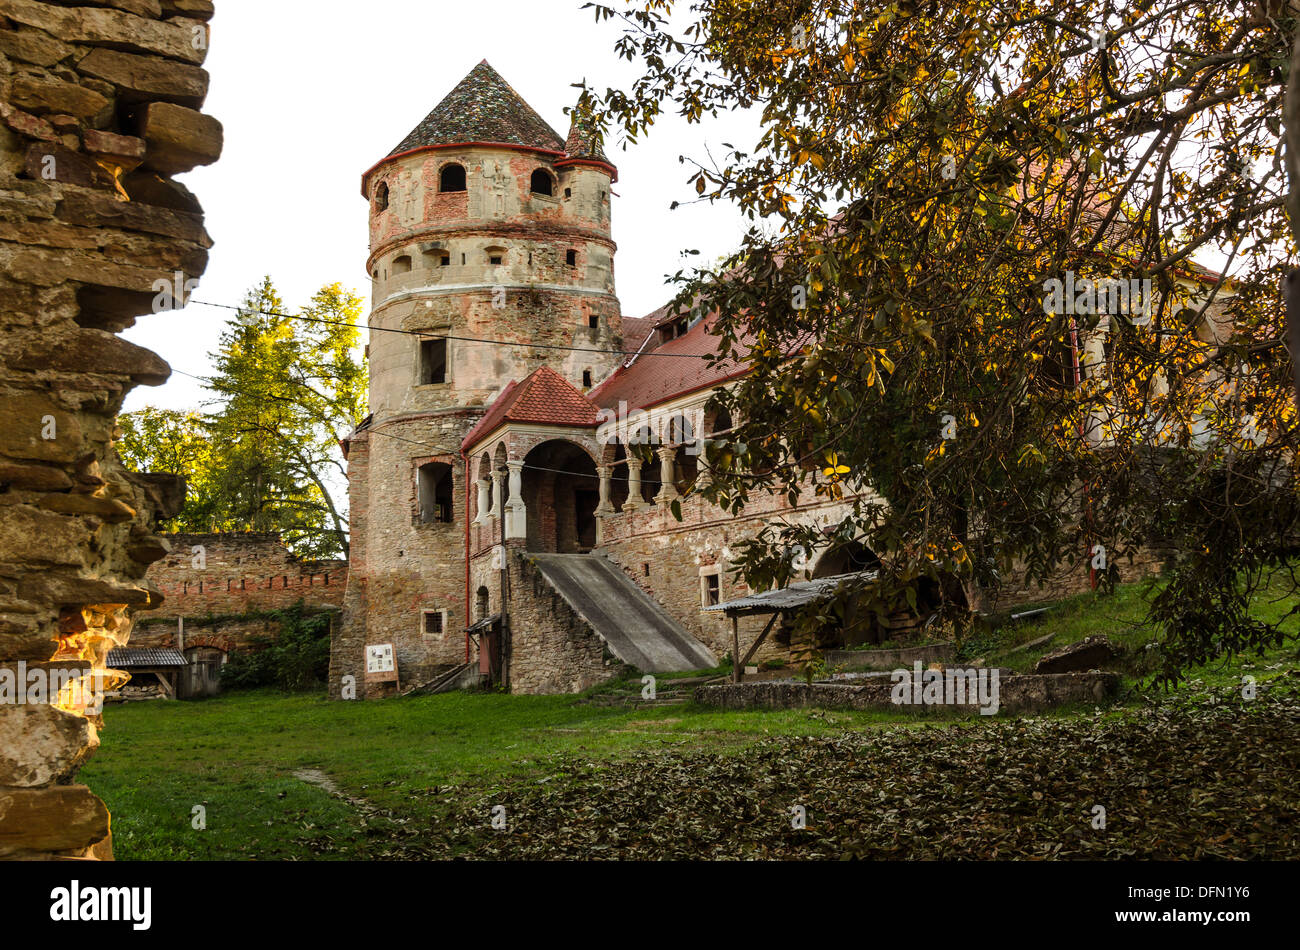 Renovation of an old castle - The Bethlen Castle, built between 14th-17th centuries. Stock Photo